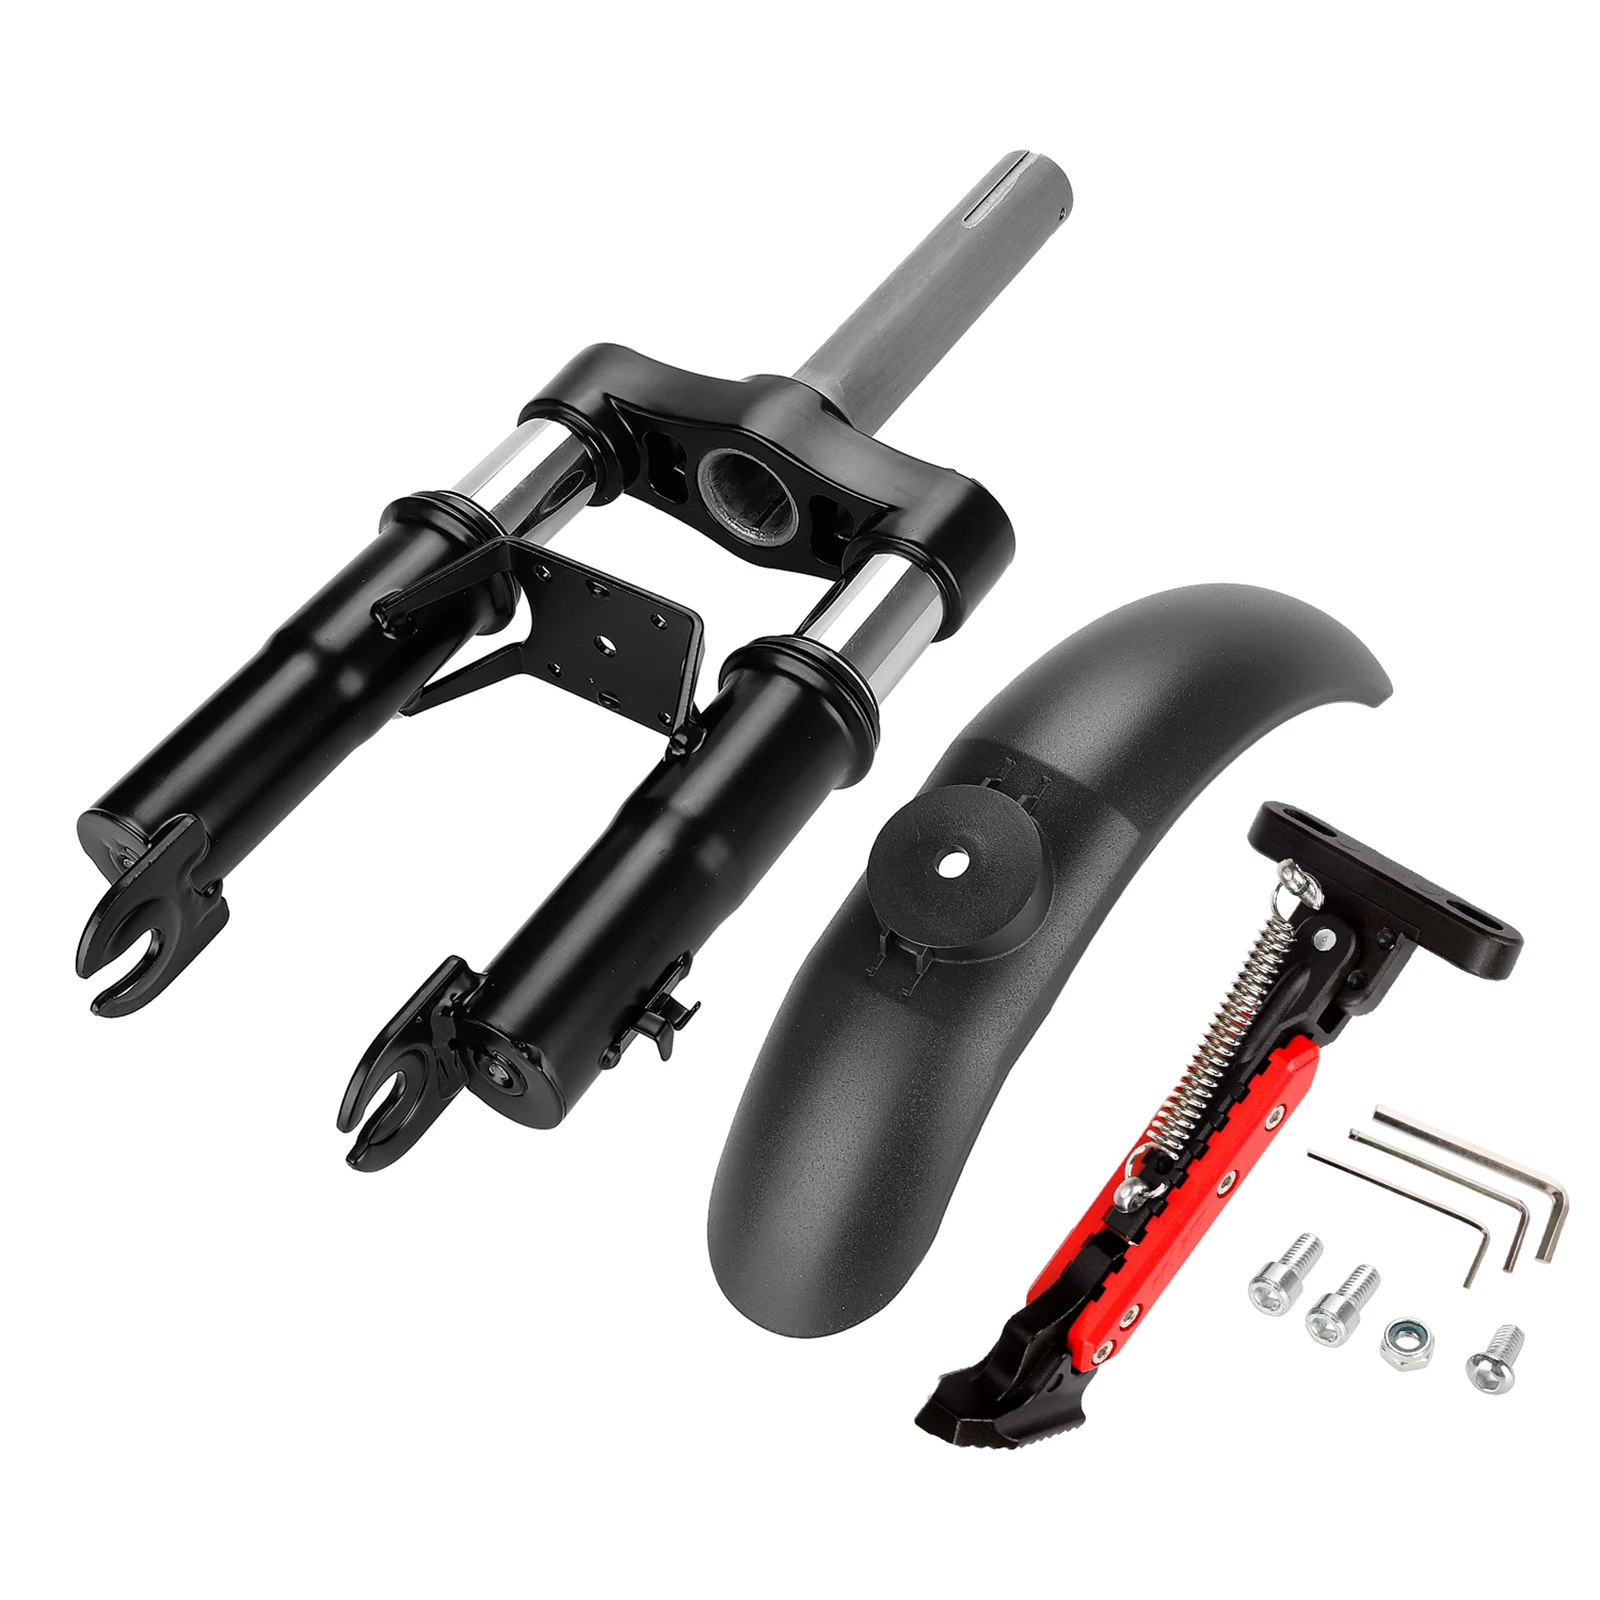 

Electric Scooters Shock Shock Absorber with Adjustable Kickstand and Mudguard for for Xiaomi M365 Pro Pro2 Electric Scooter